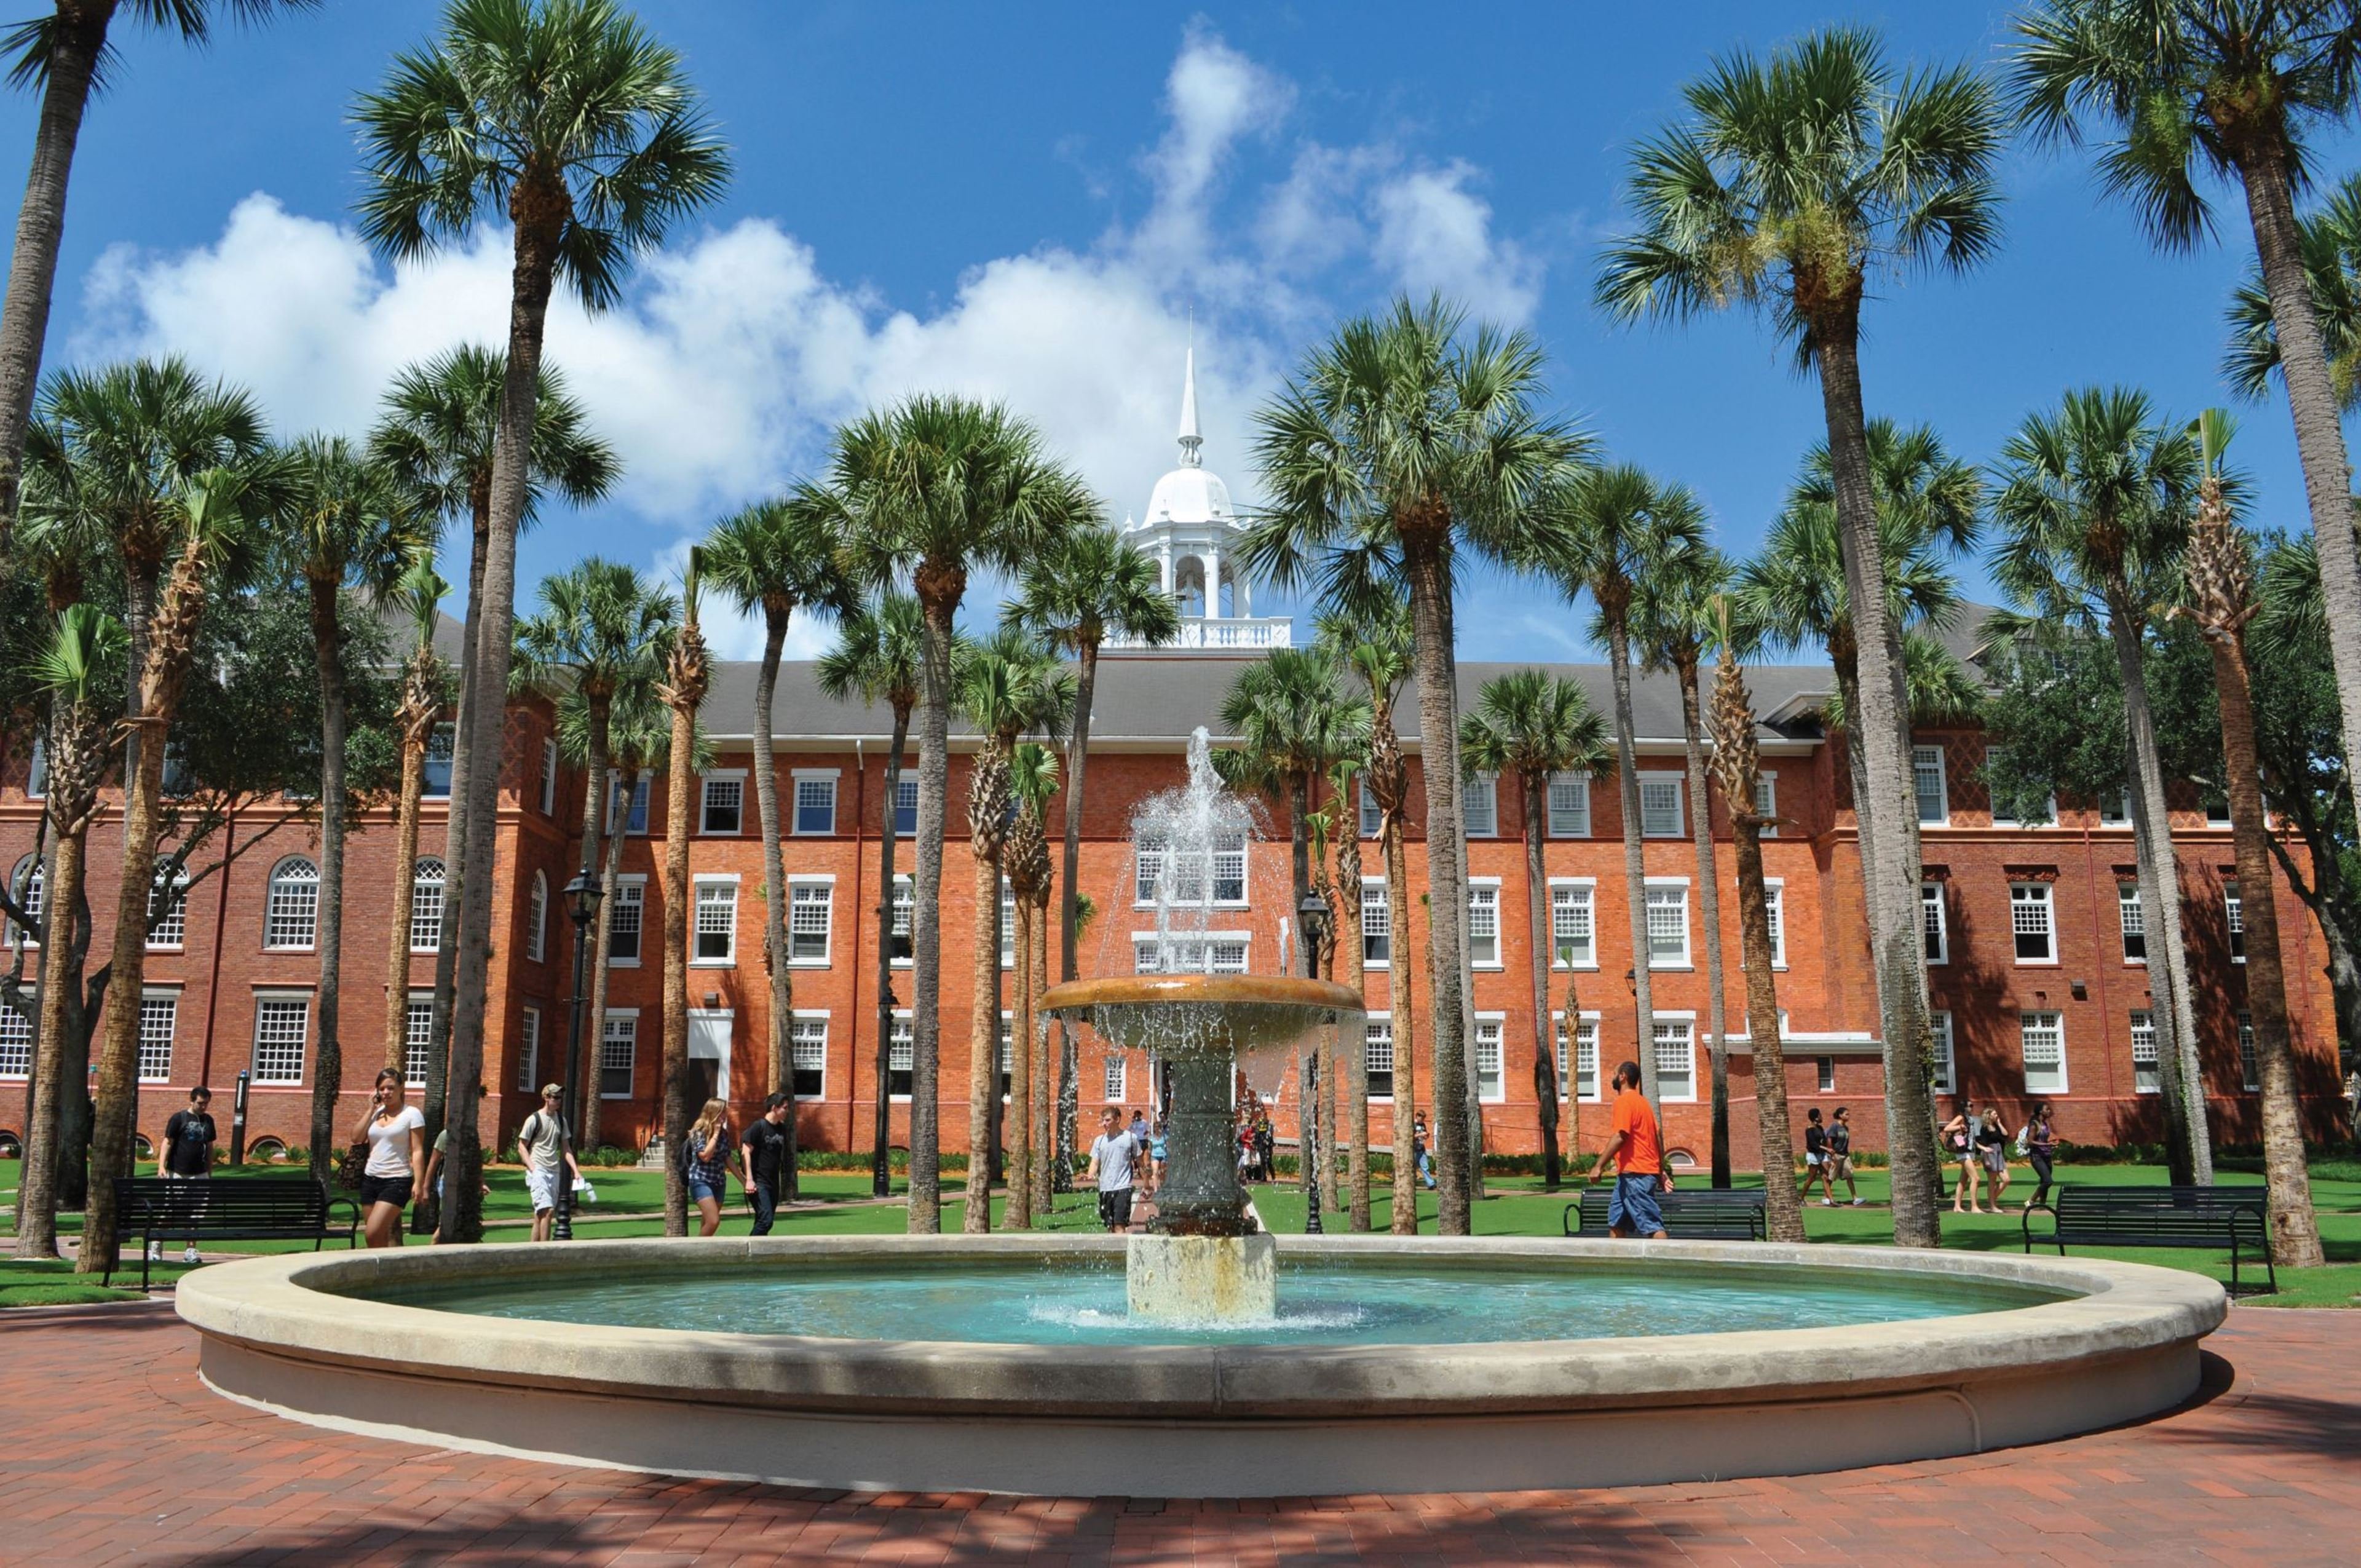 Just down the road from Stetson University in DeLand Florida